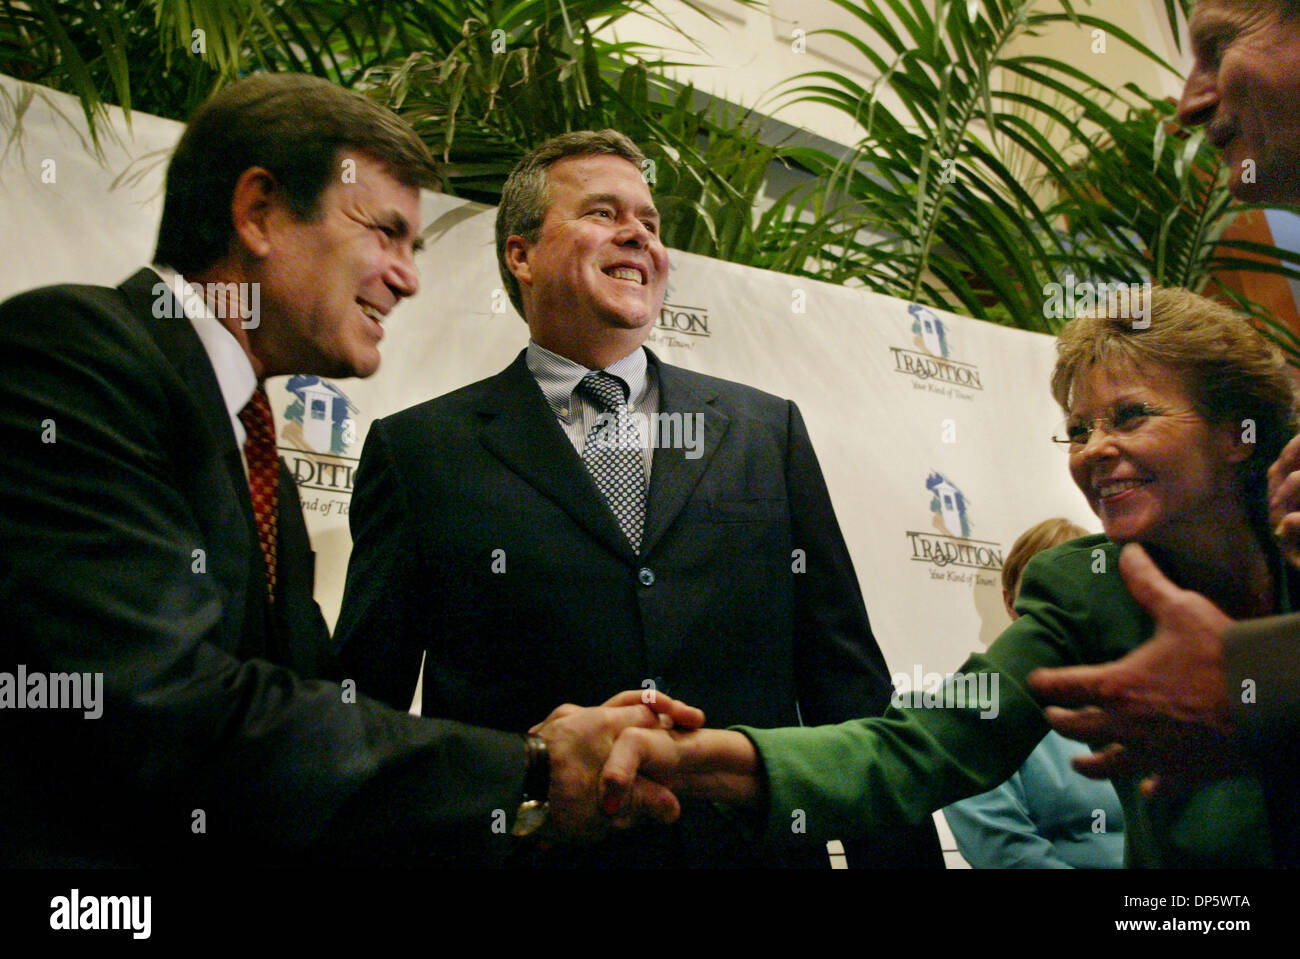 Sep 26, 2006; Port St. Lucie, FL, USA; Governor JEB BUSH and  President Dr. Richard Houghten greet guests Frannie Hutchinson, St. Lucie County Commissioner and Doug Anderson, St. Lucie County Administrator during Wednesday's official announcement of the Institute for Molecular Studies plans to establish a Florida headquarters in the community of Tradition.  Mandatory Credit: Photo  Stock Photo